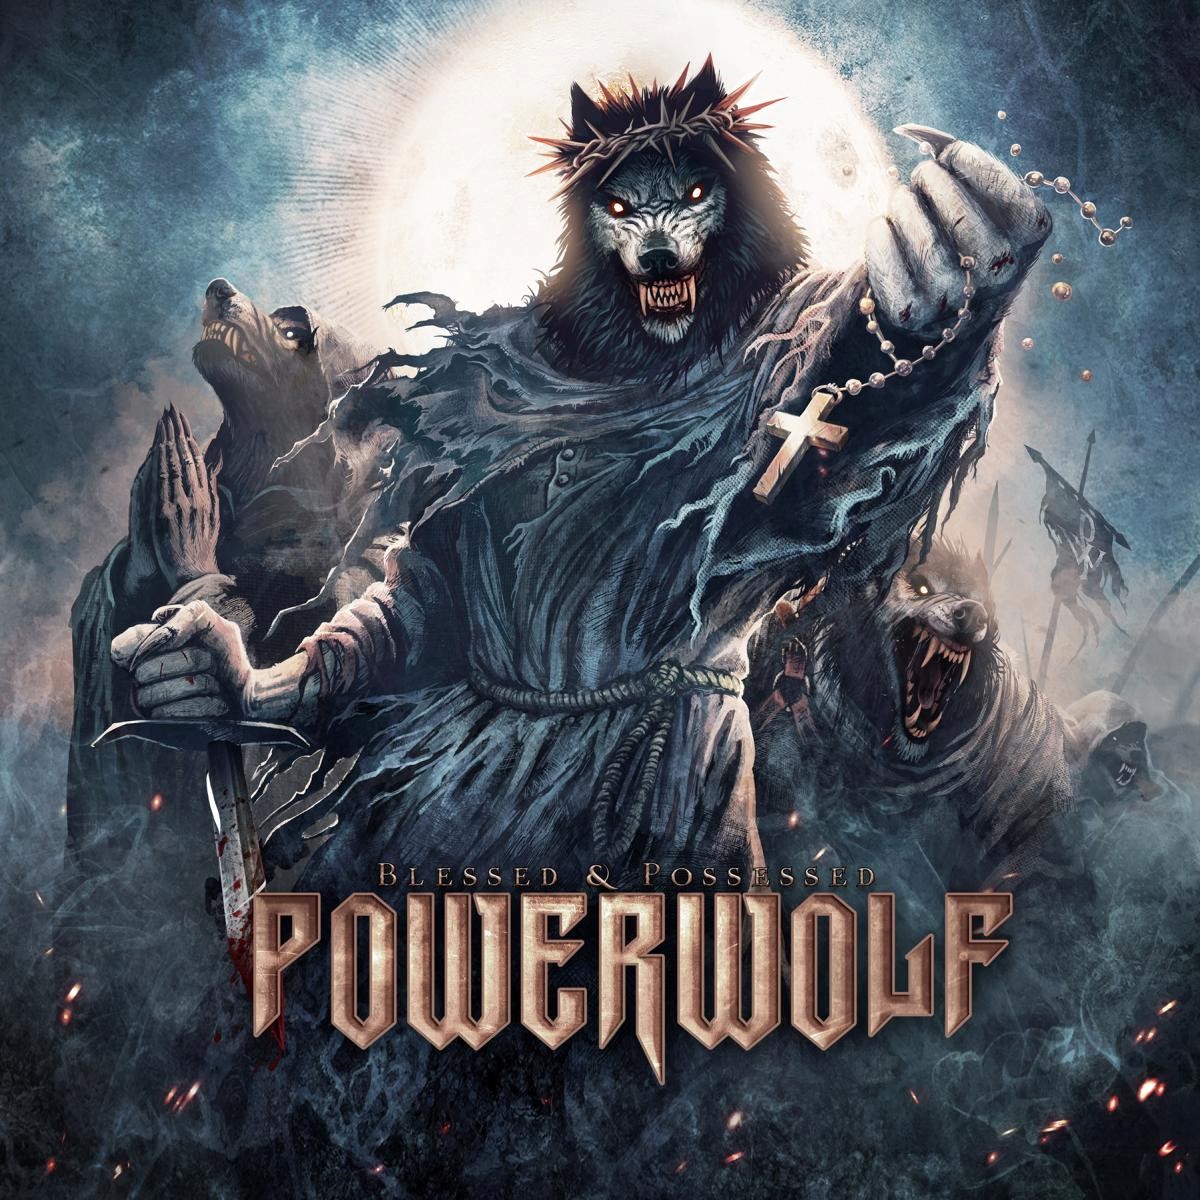 Best of the blessed, Powerwolf CD